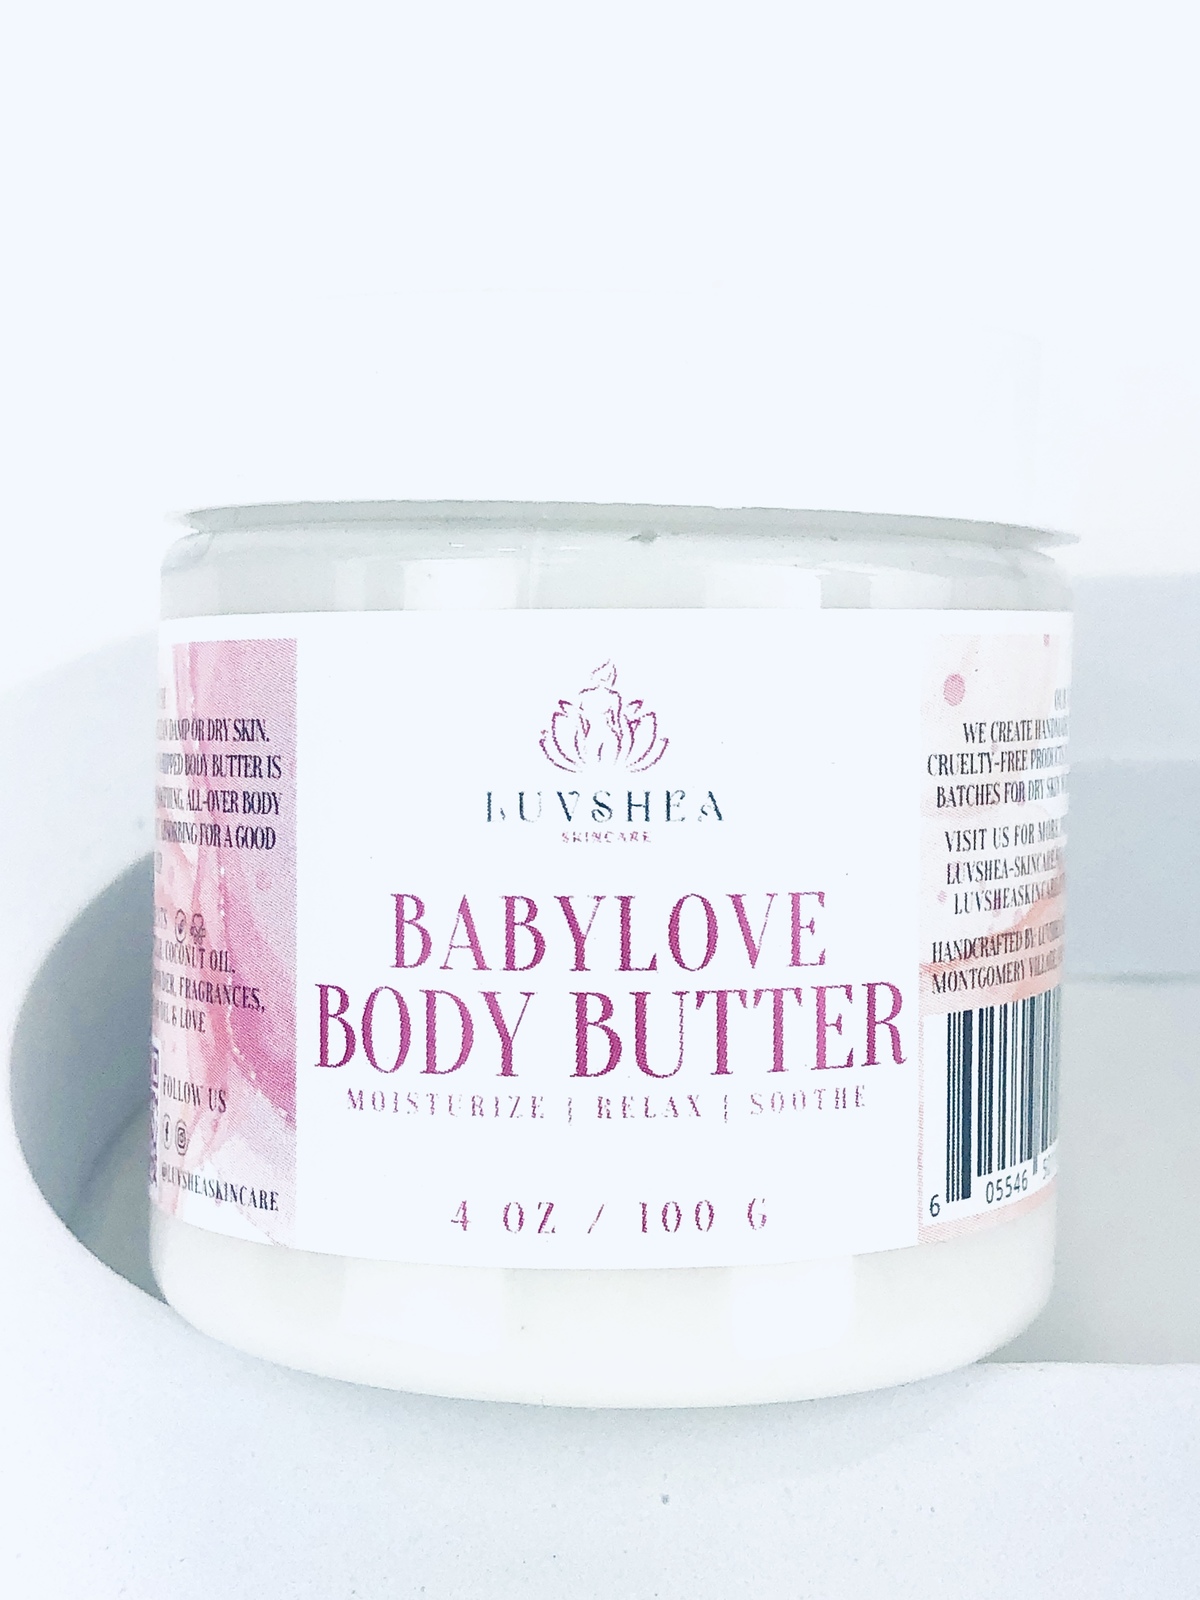 BABYLOVE Vegan Whipped Body Butter For Women | with Magnesium | 4oz jar - $19.99